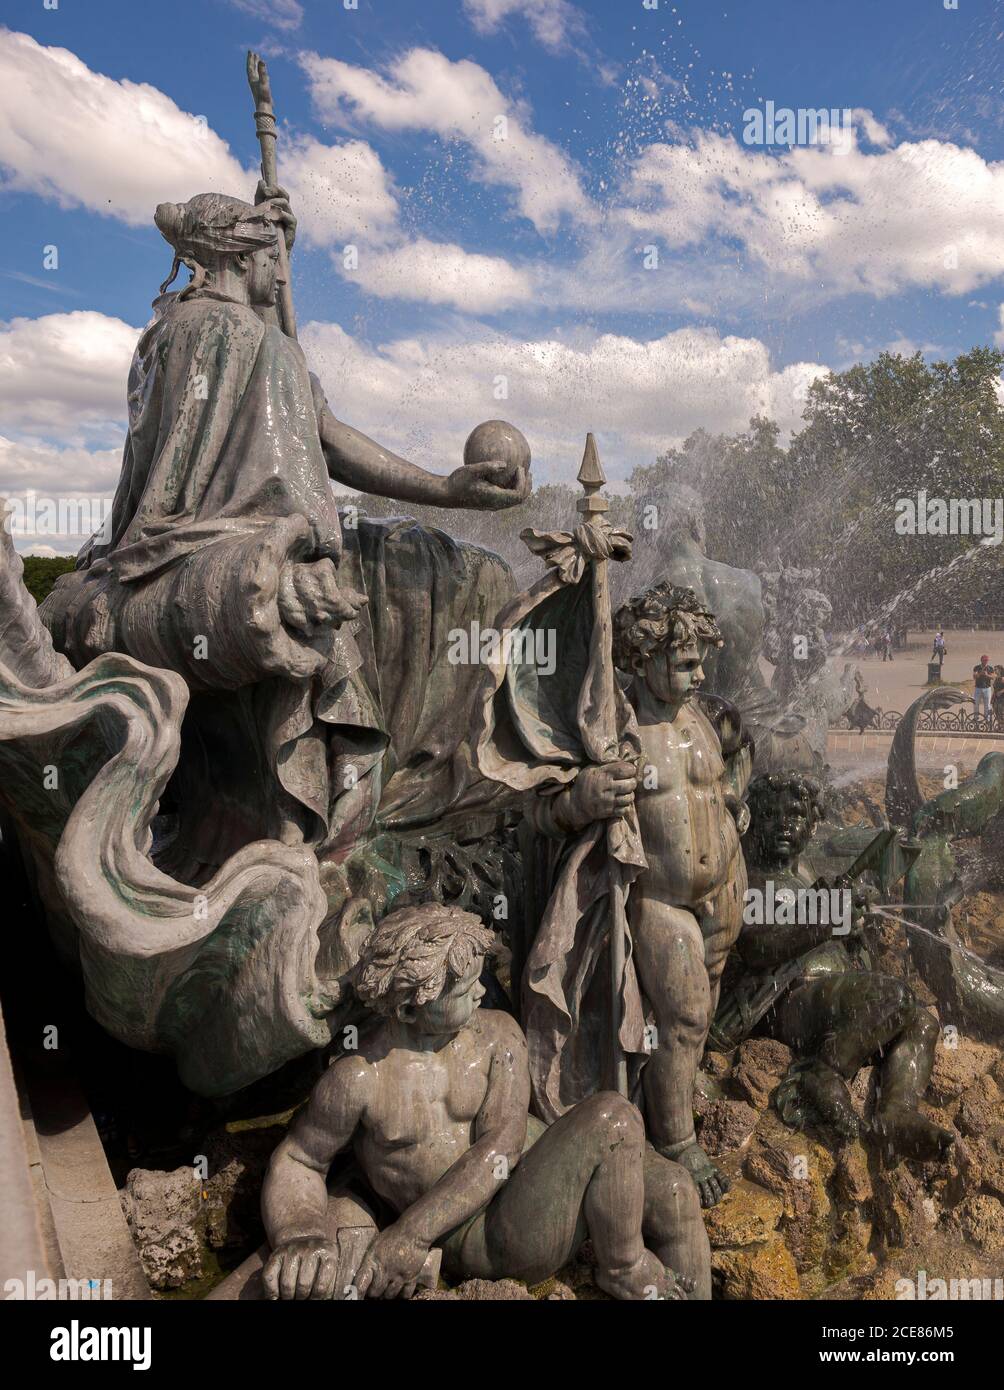 BORDEAUX, FRANCE – AUGUST 13, 2017: Detail of the fountain of the Monument aux Girondins in the Place des Quinconces Stock Photo